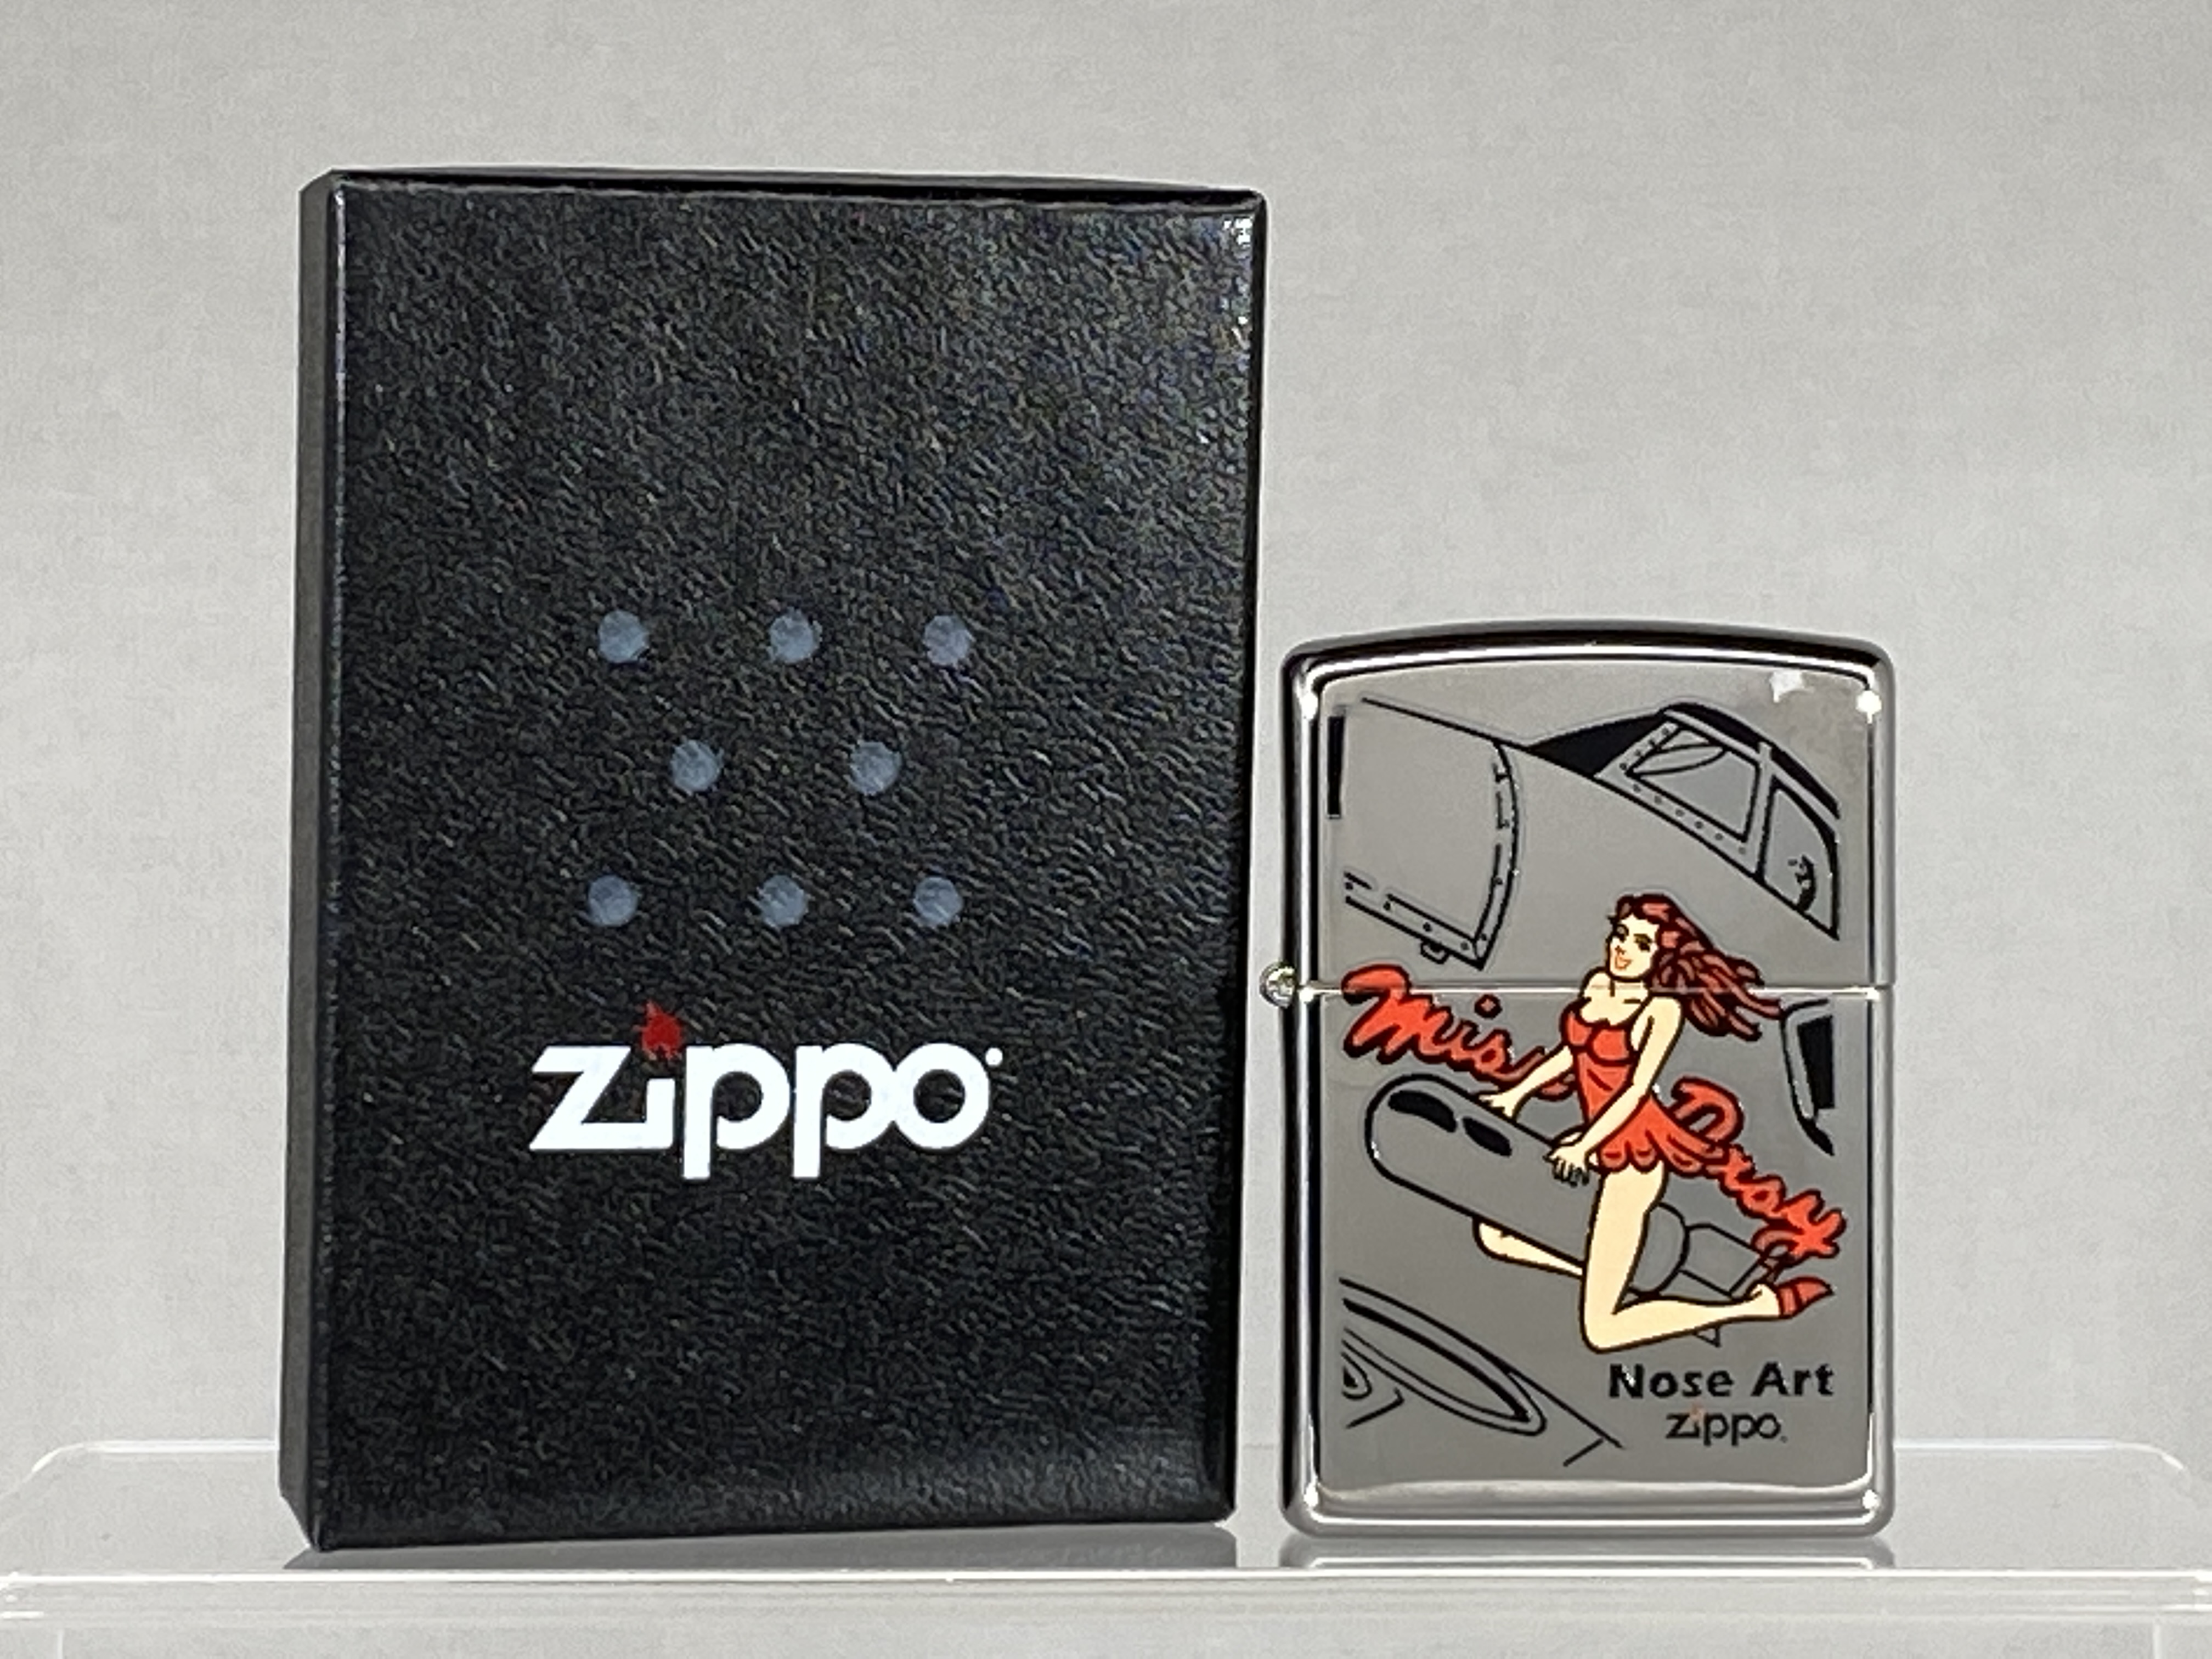 2012 ZIPPO 250 NOSE ART PINUP GIRL Polished Chrome Lighter MINT IN BOX .